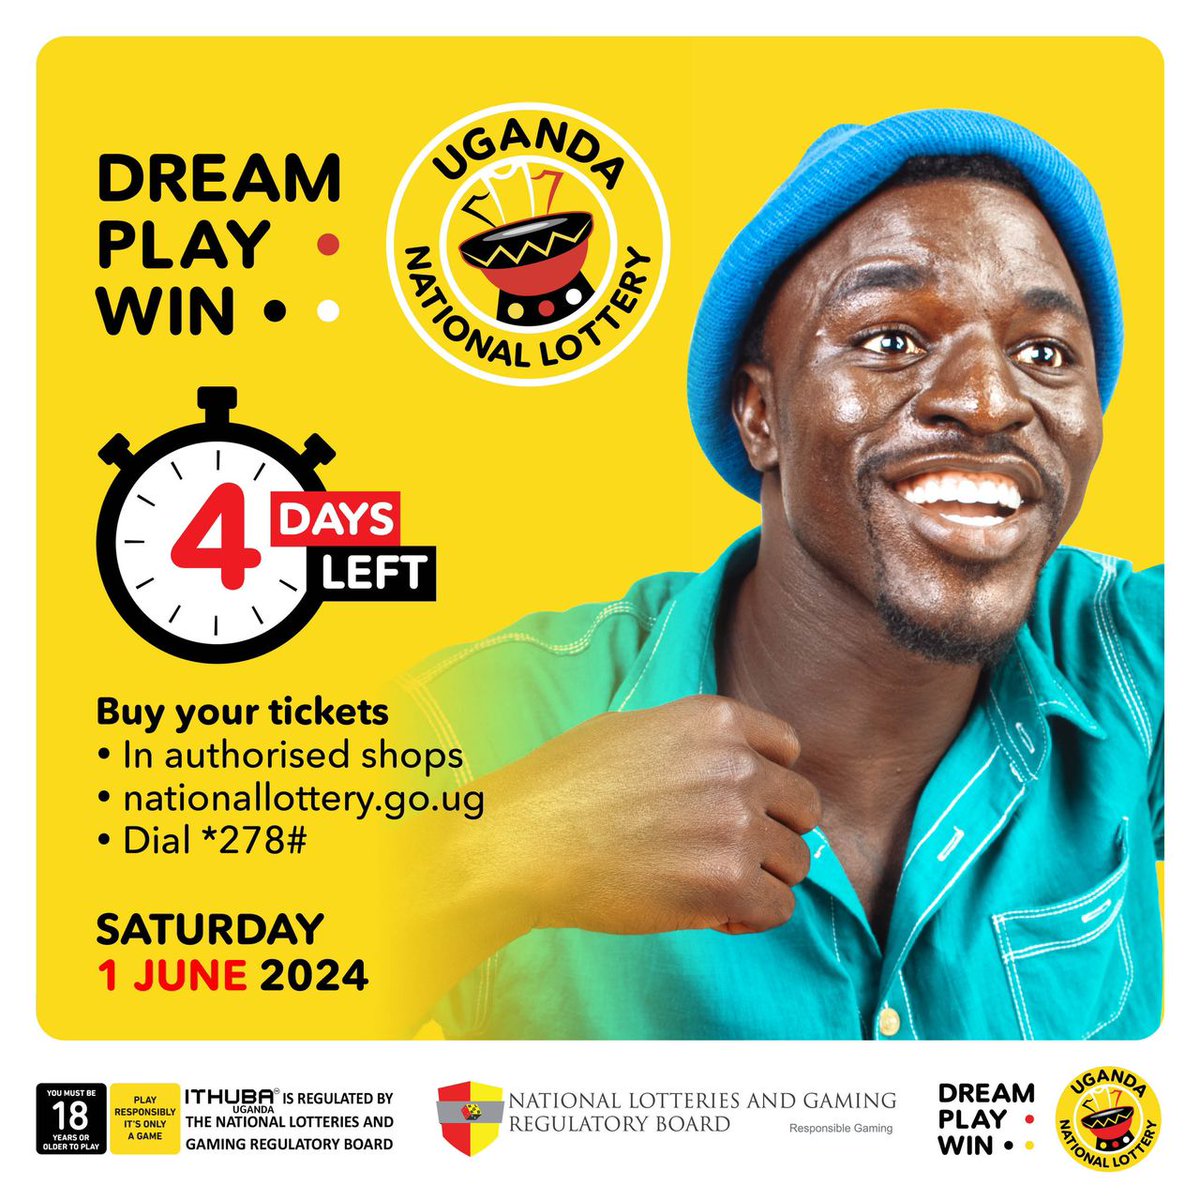 Just 4 days left for you to be a lucky winner just Dream play and win #UgandaNationalLottery